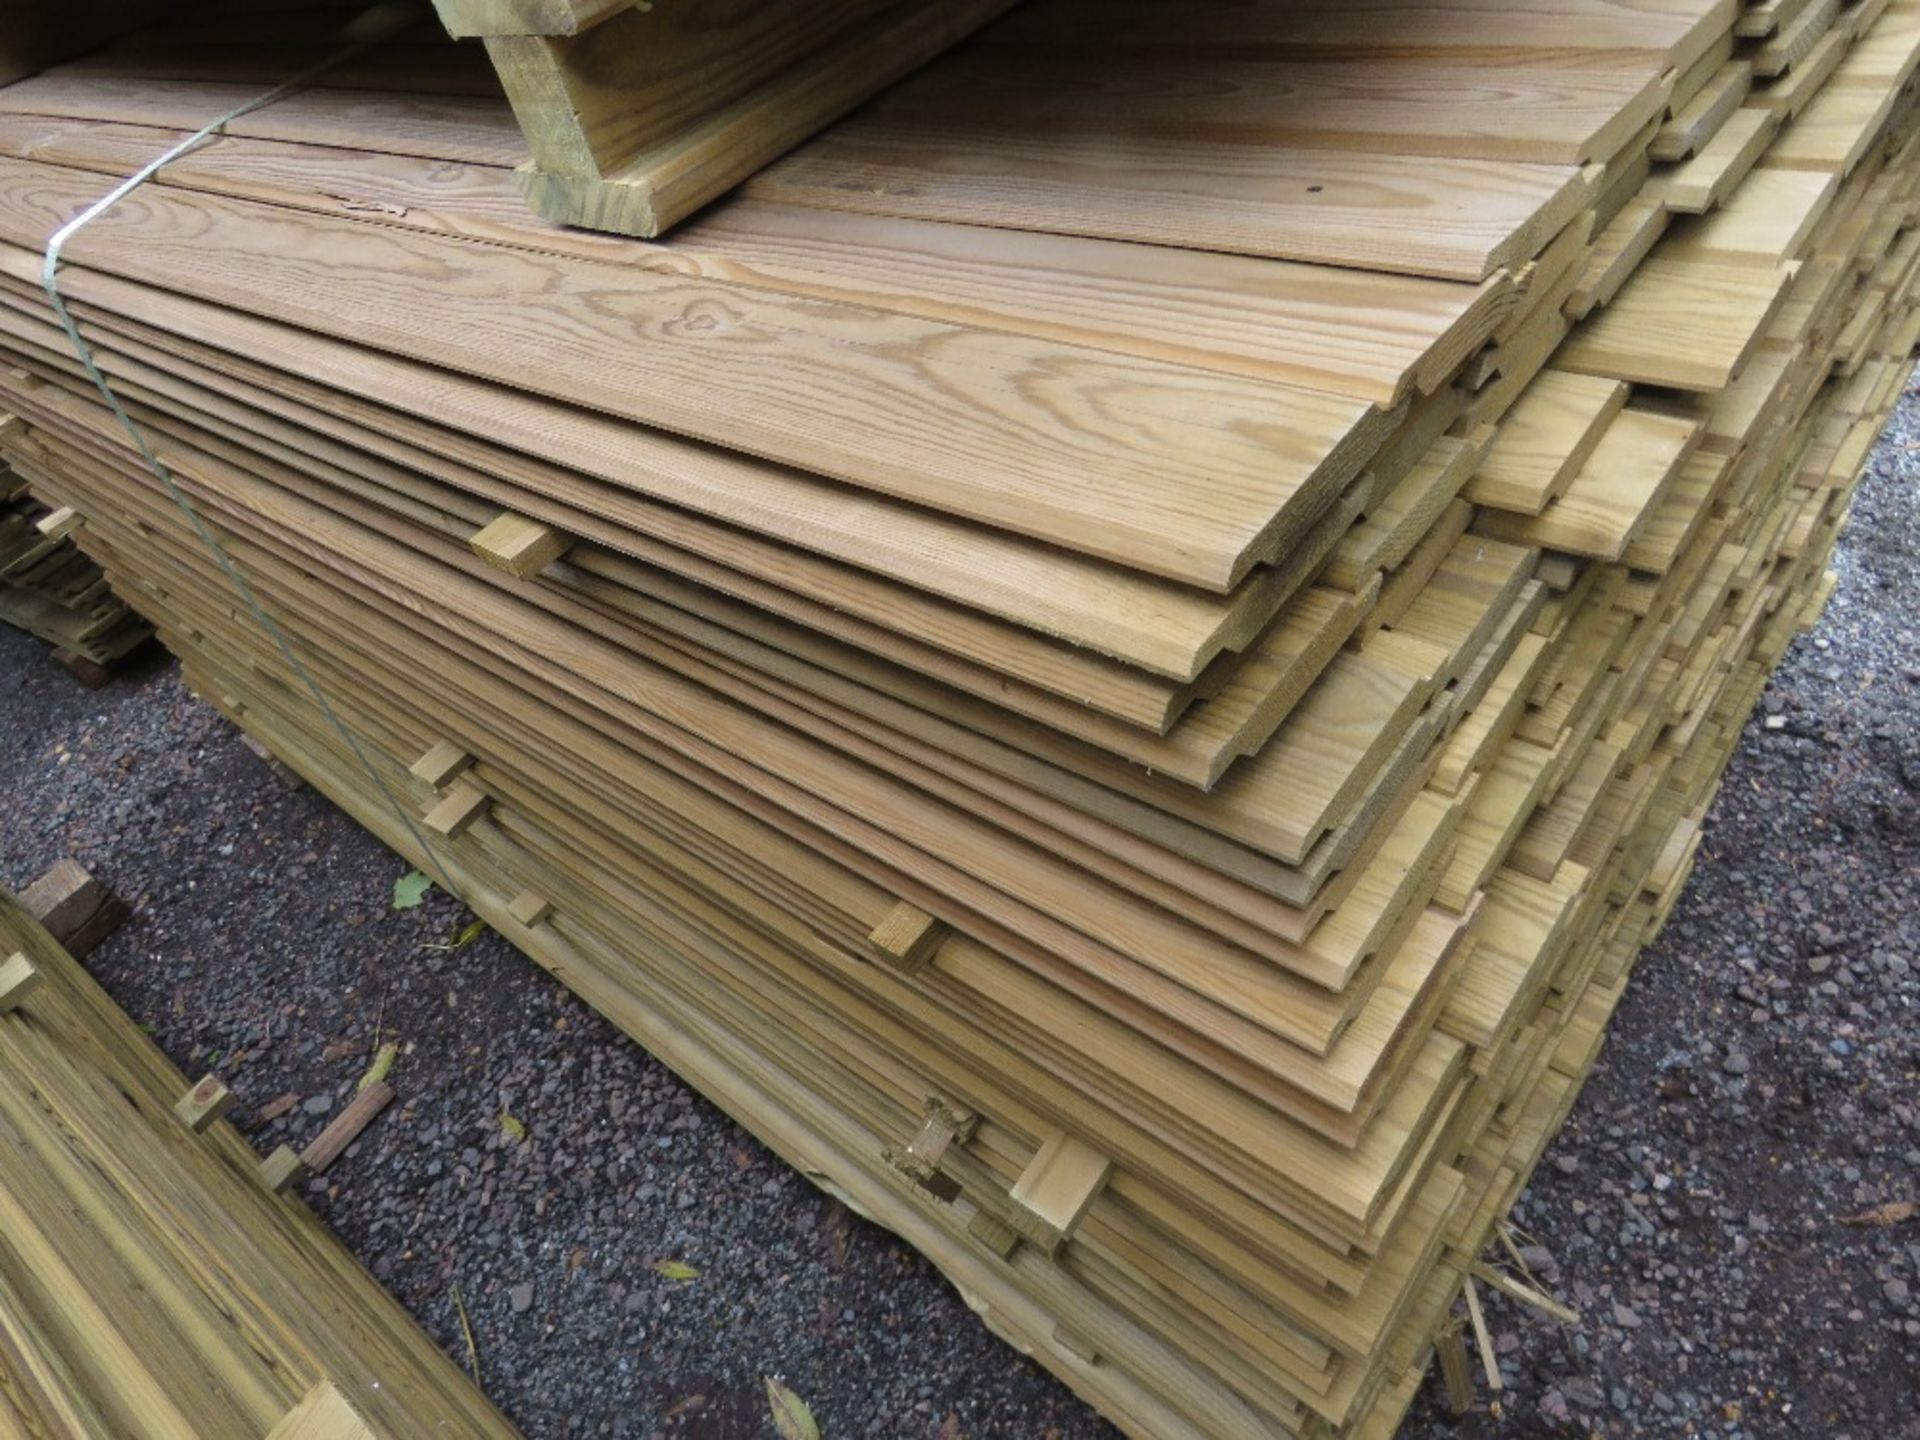 LARGE PACK OF TREATED SHIPLAP TIMBER CLADDING BOARDS. 1.73M LENGTH X 95MM WIDTH APPROX. - Image 3 of 3